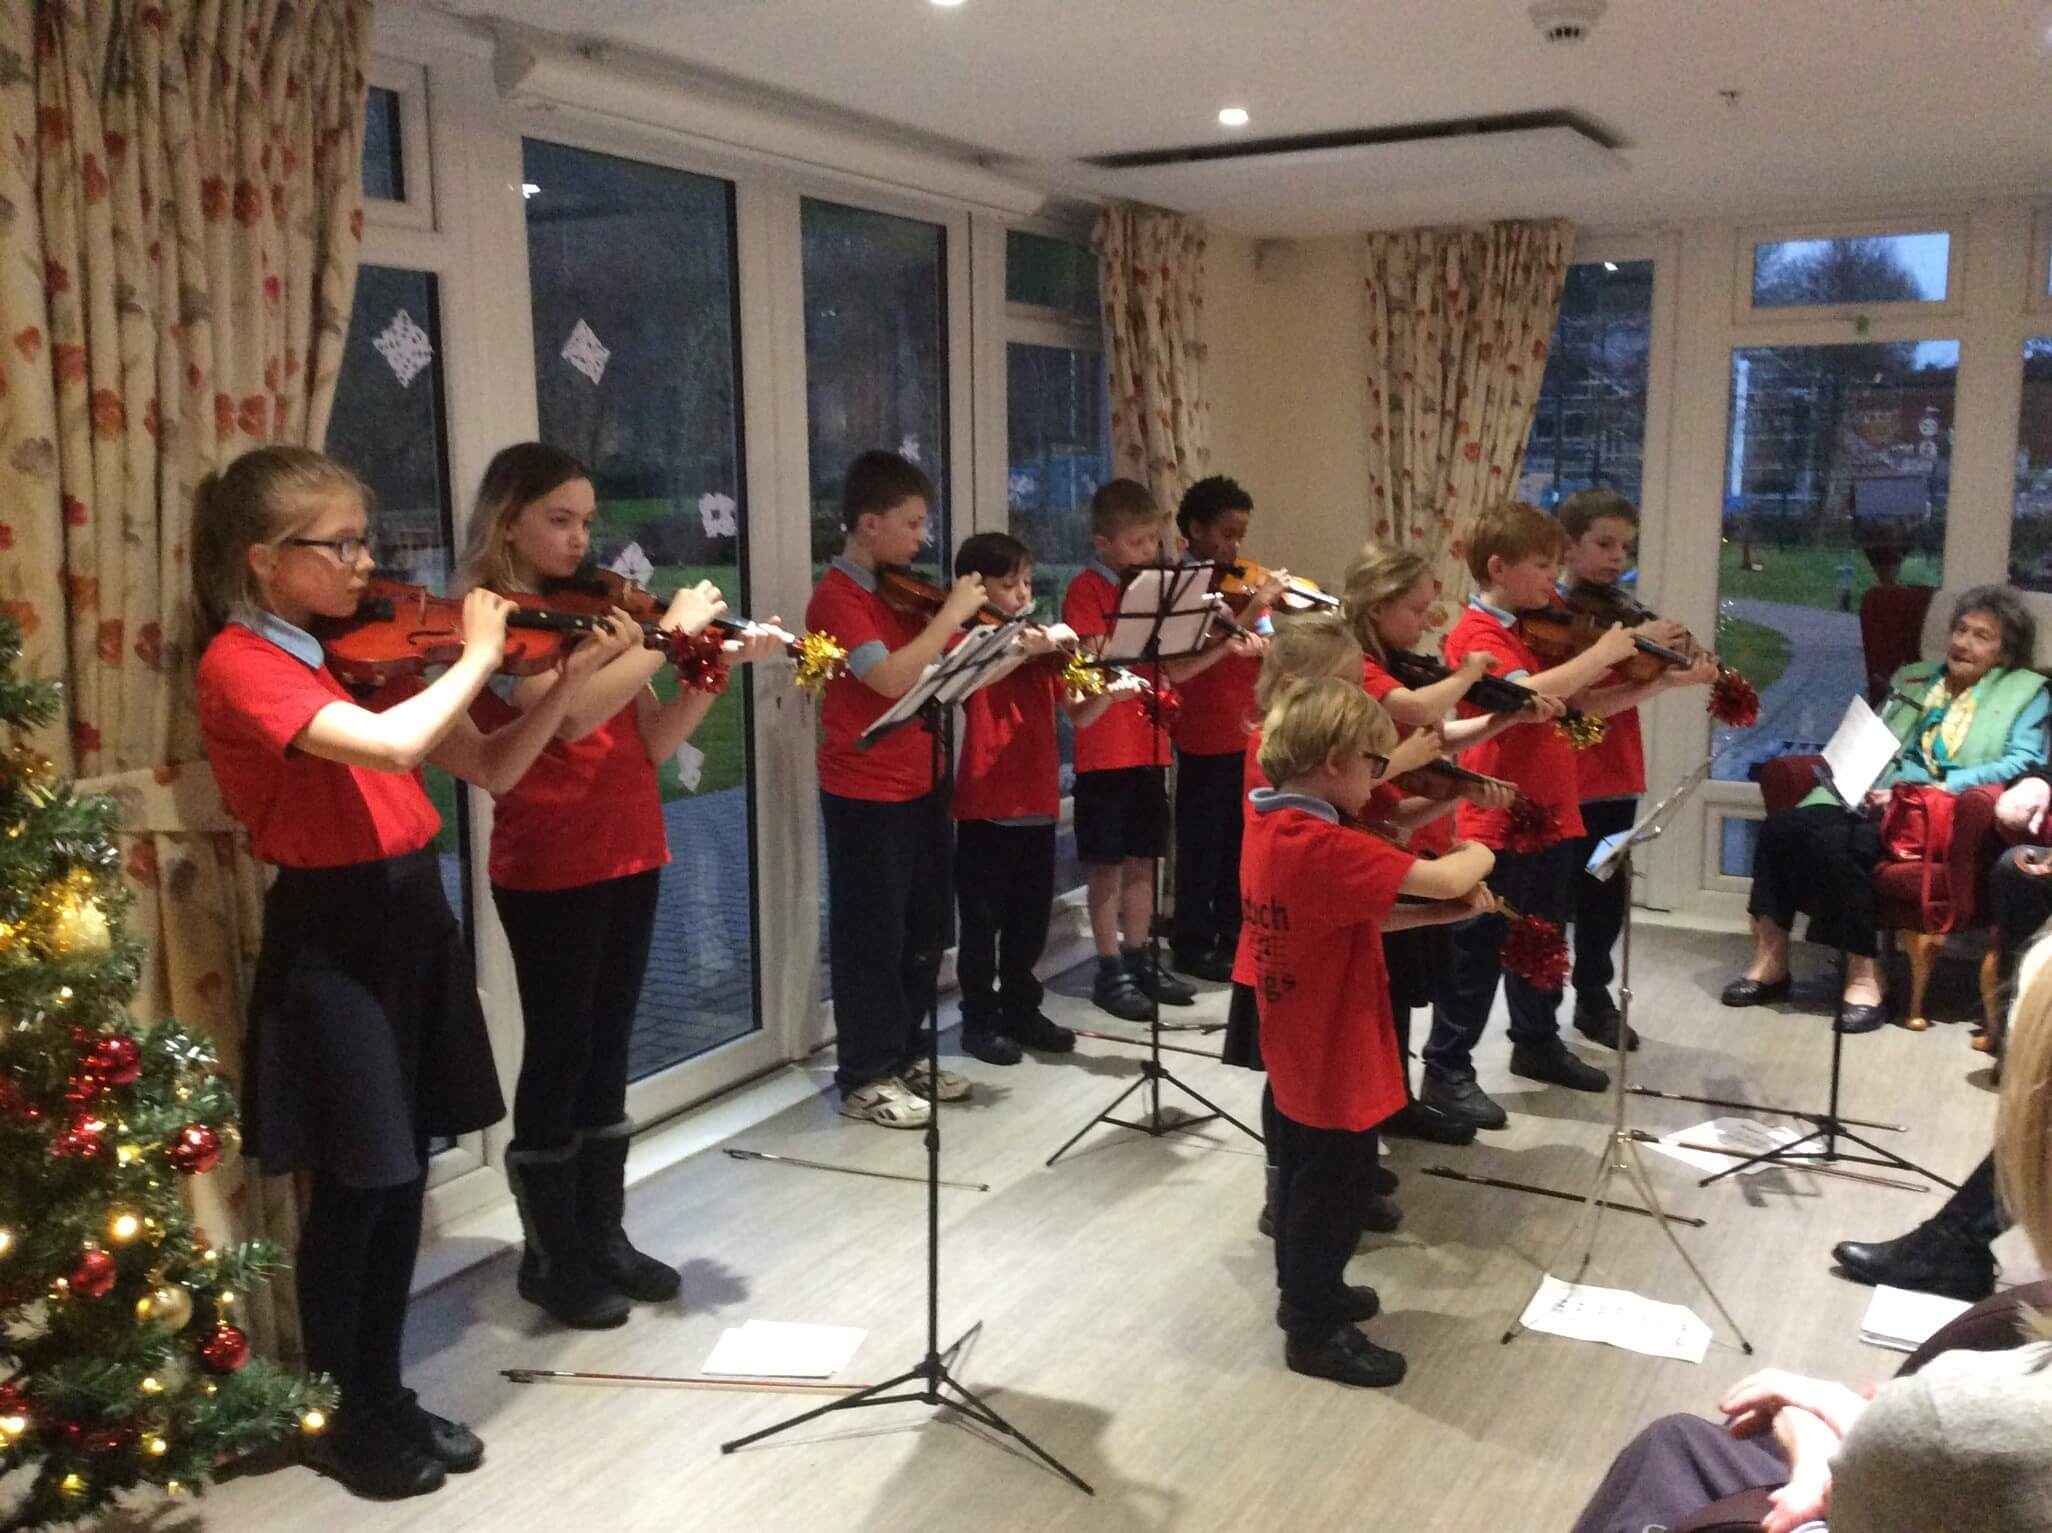 The ardoch Strings playing at a care home during Christmas